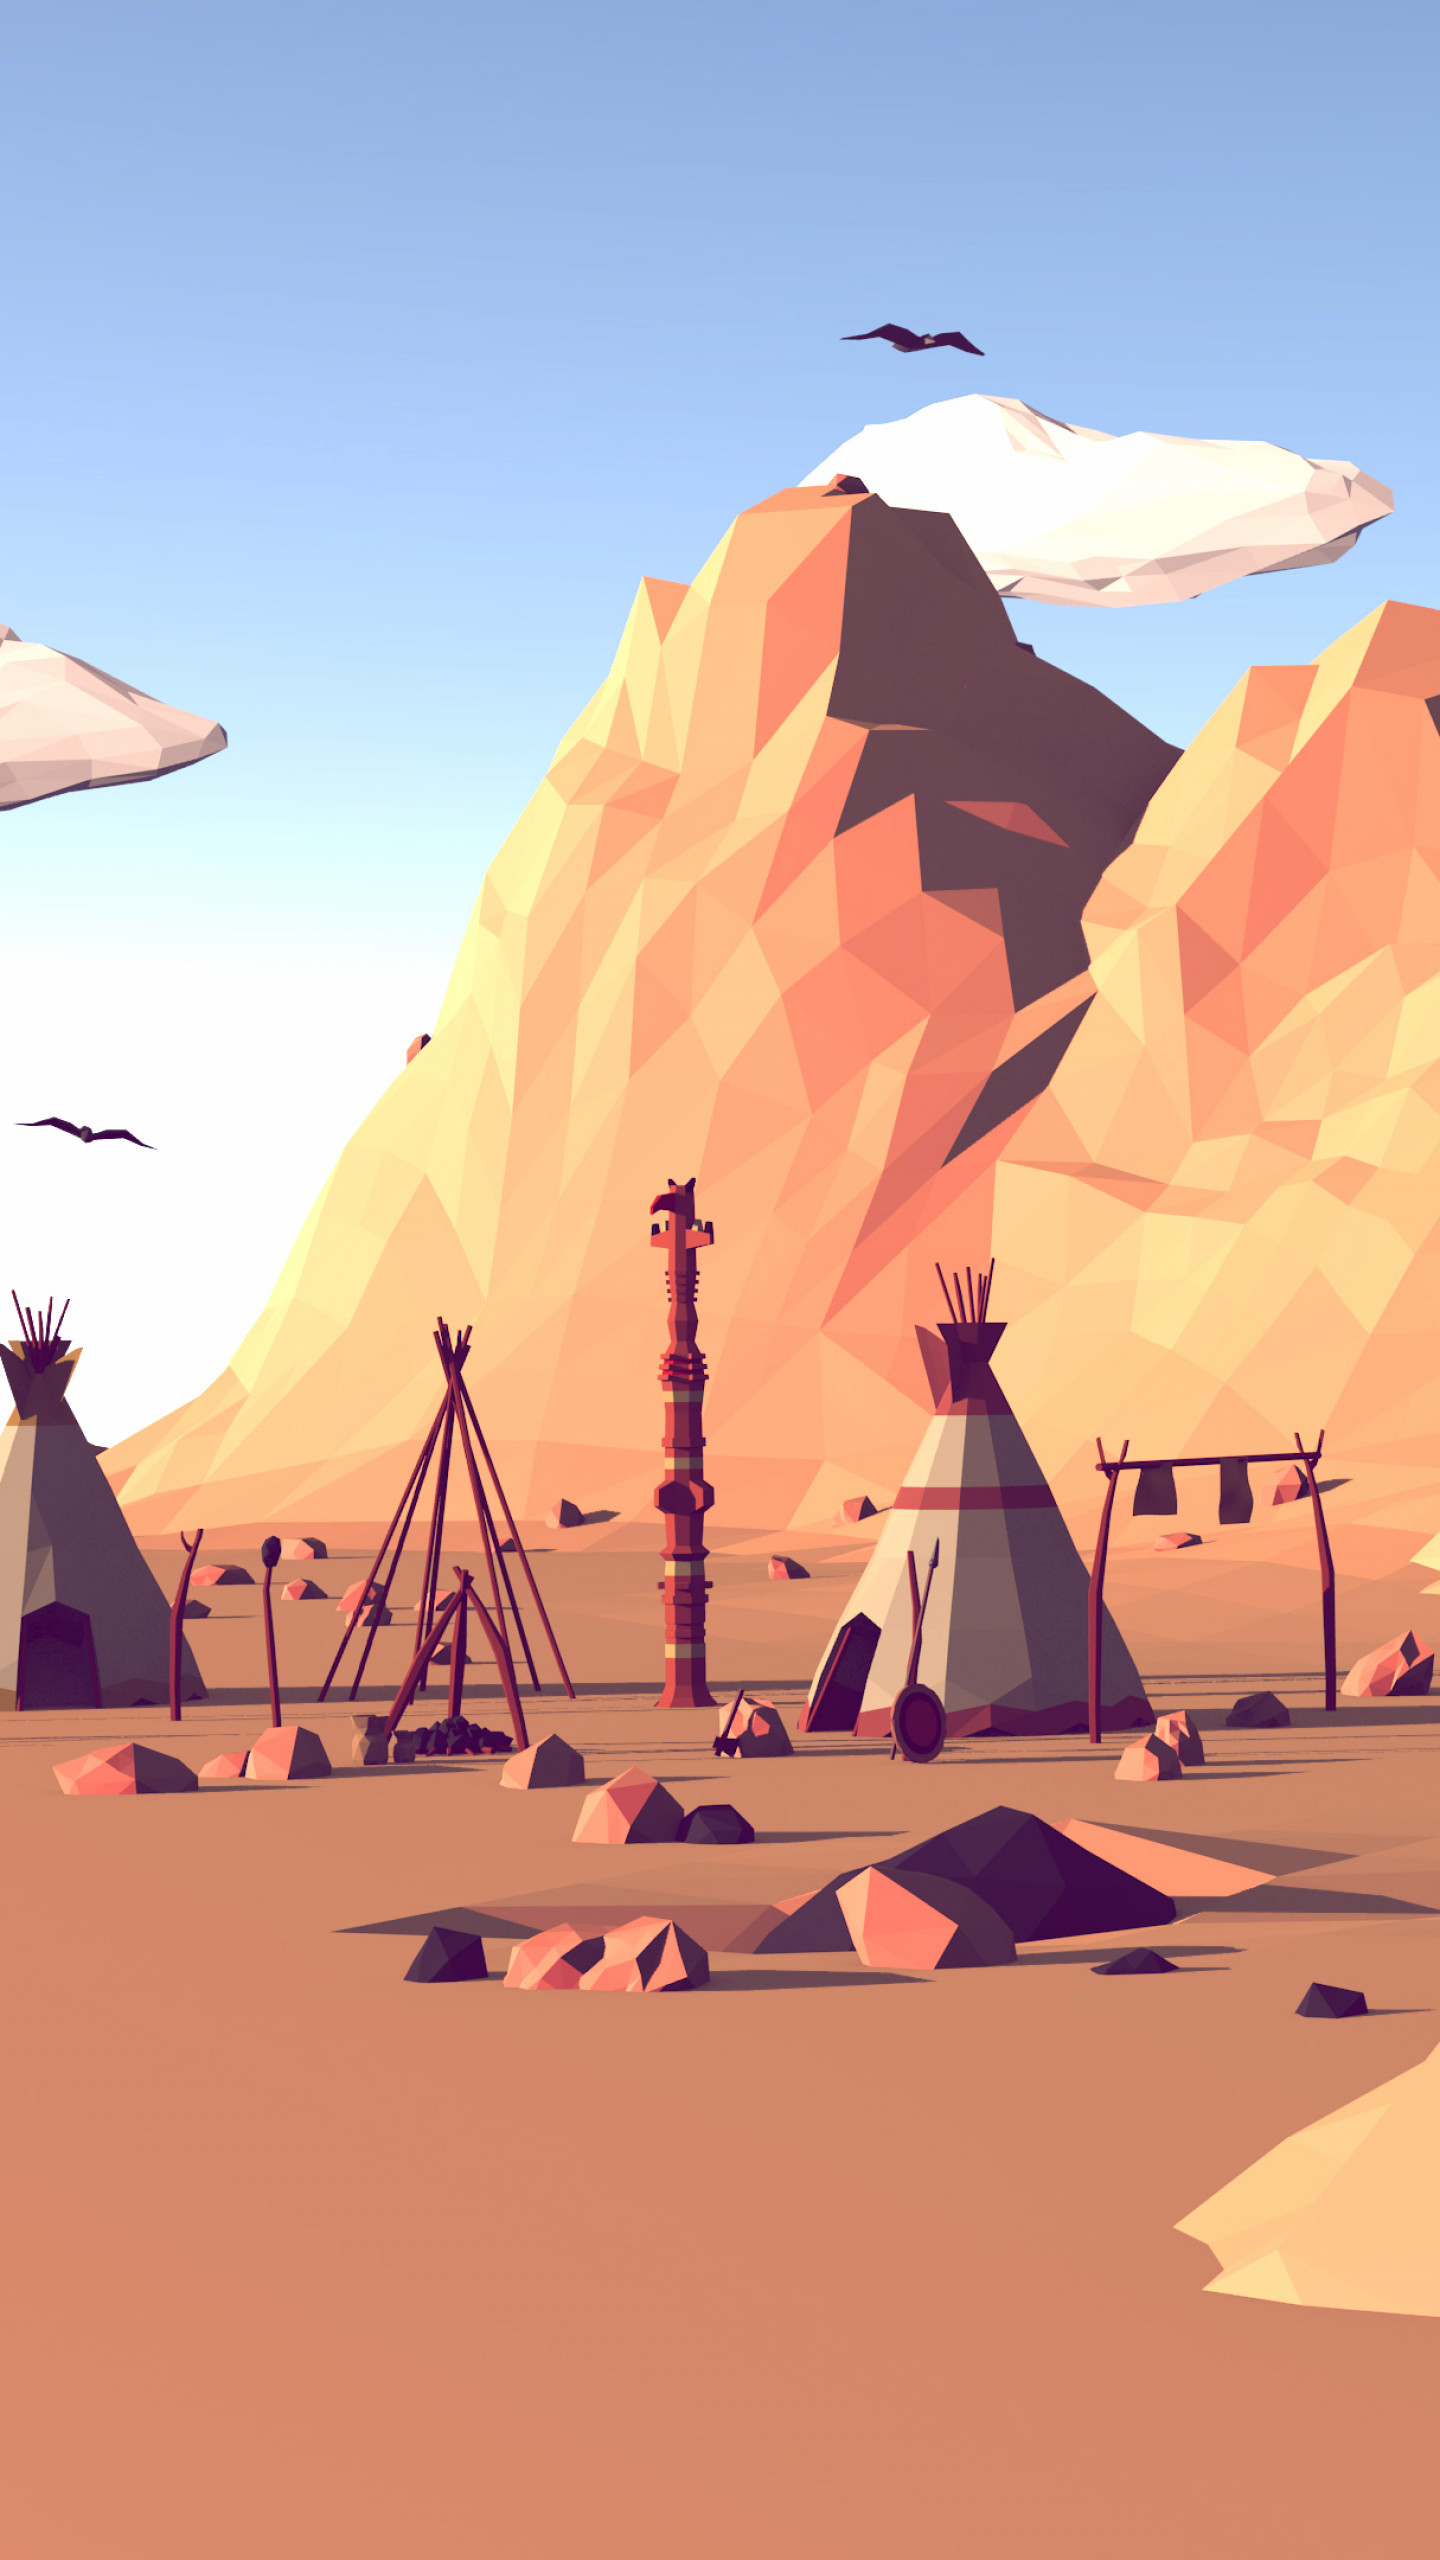 Download wallpaper 1920x1080 polygon low poly art mountains sand full  hd hdtv fhd 1080p hd background